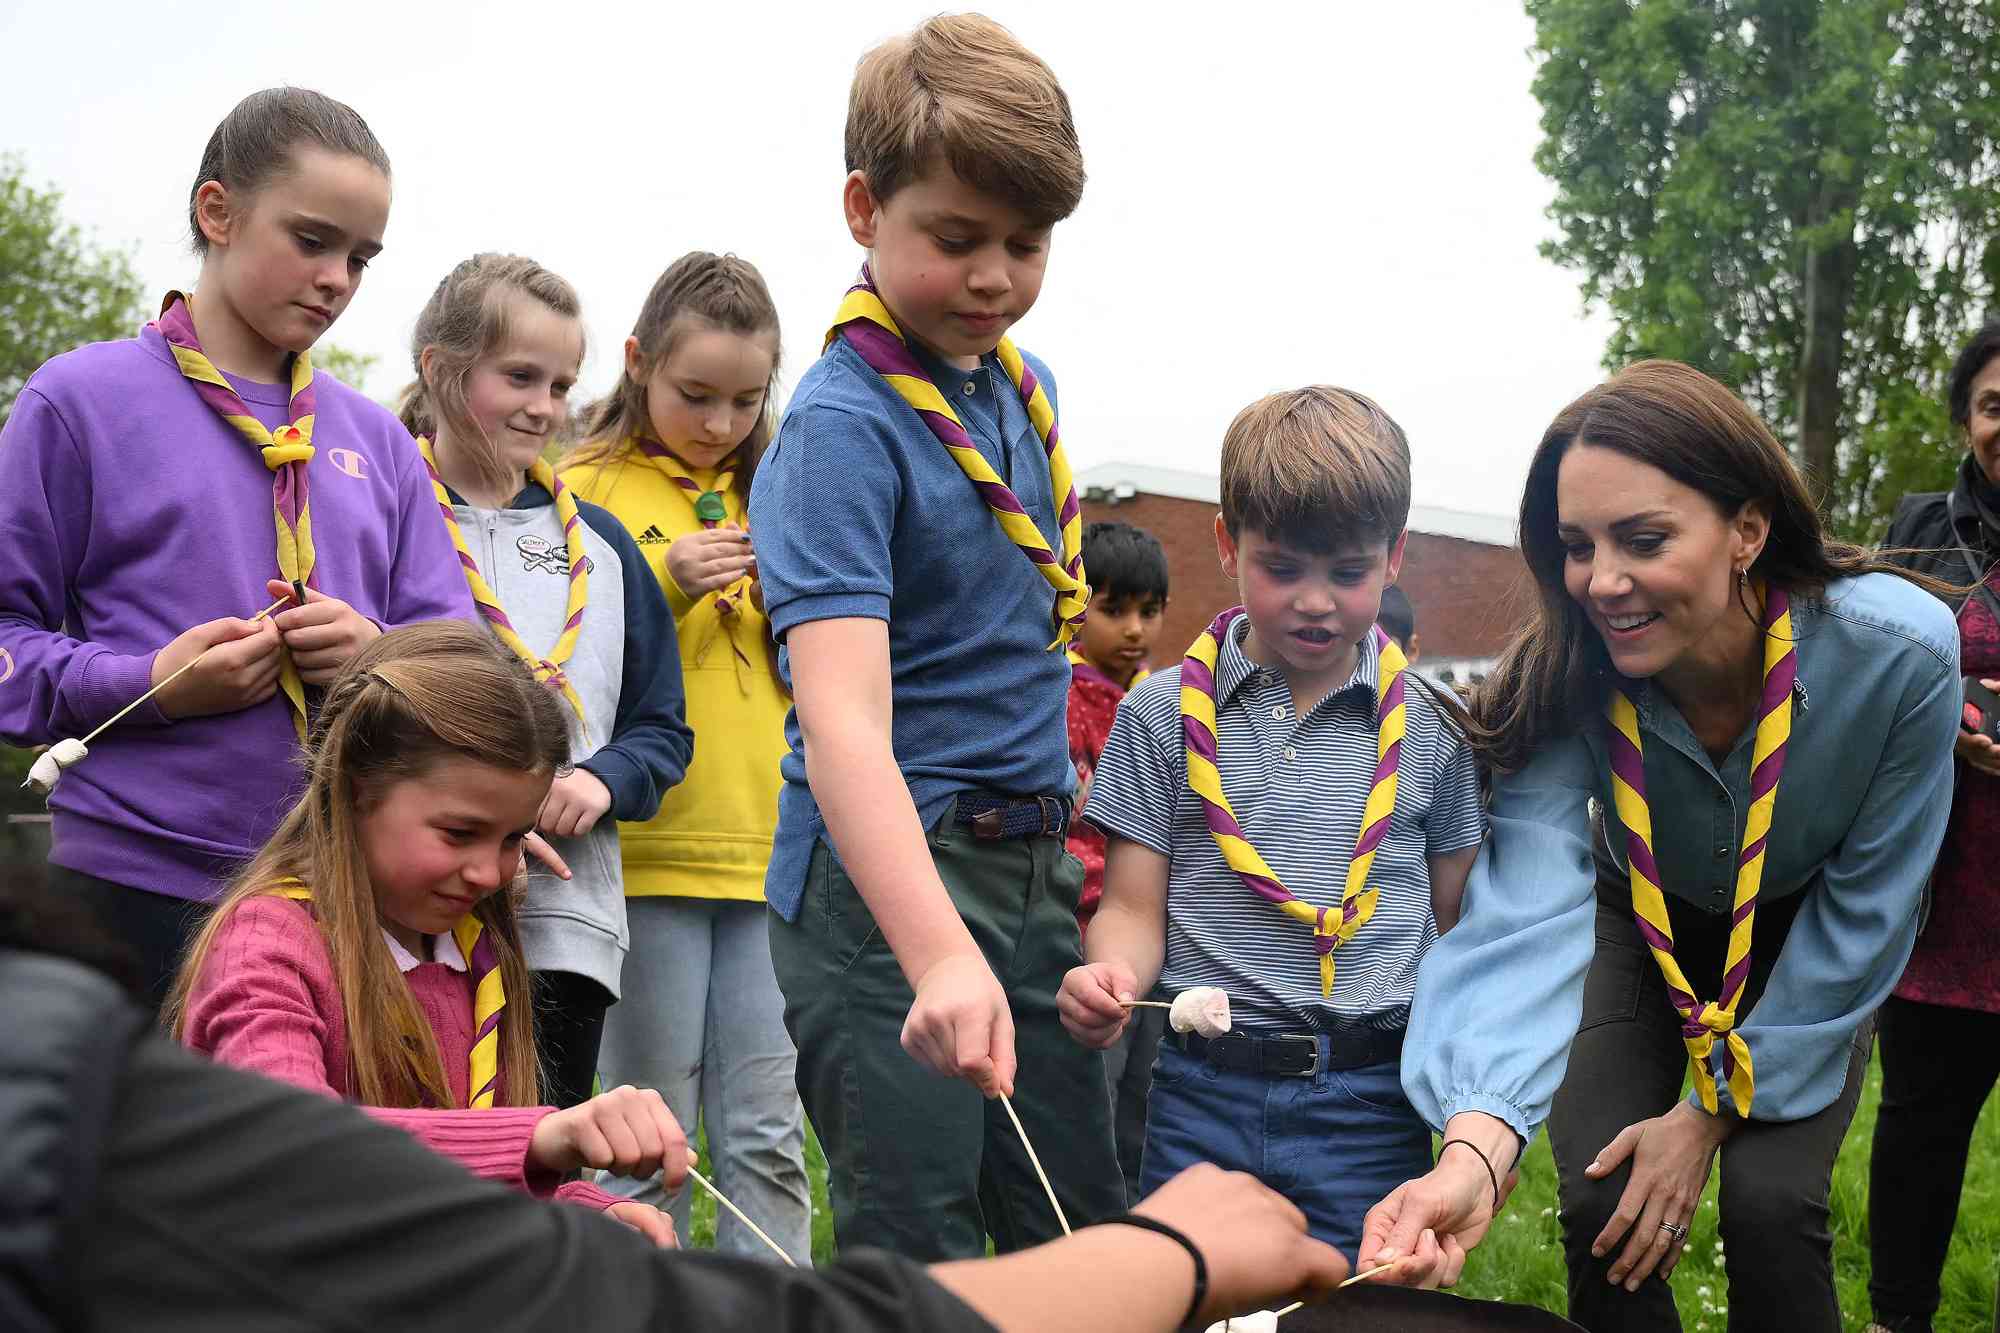 Britain's Prince William, Prince of Wales (R) looks on as (L-R) Britain's Princess Charlotte of Wales, Britain's Prince George of Wales, Britain's Prince Louis of Wales and Britain's Catherine, Princess of Wales toast marshmallows as they take part in the Big Help Out, during a visit to the 3rd Upton Scouts Hut in Slough, west of London on May 8, 2023, where the family joined volunteers helping to renovate and improve the building. - People across Britain were on Monday asked to do their duty as the celebrations for King Charles III's coronation drew to a close with a massive volunteering drive.